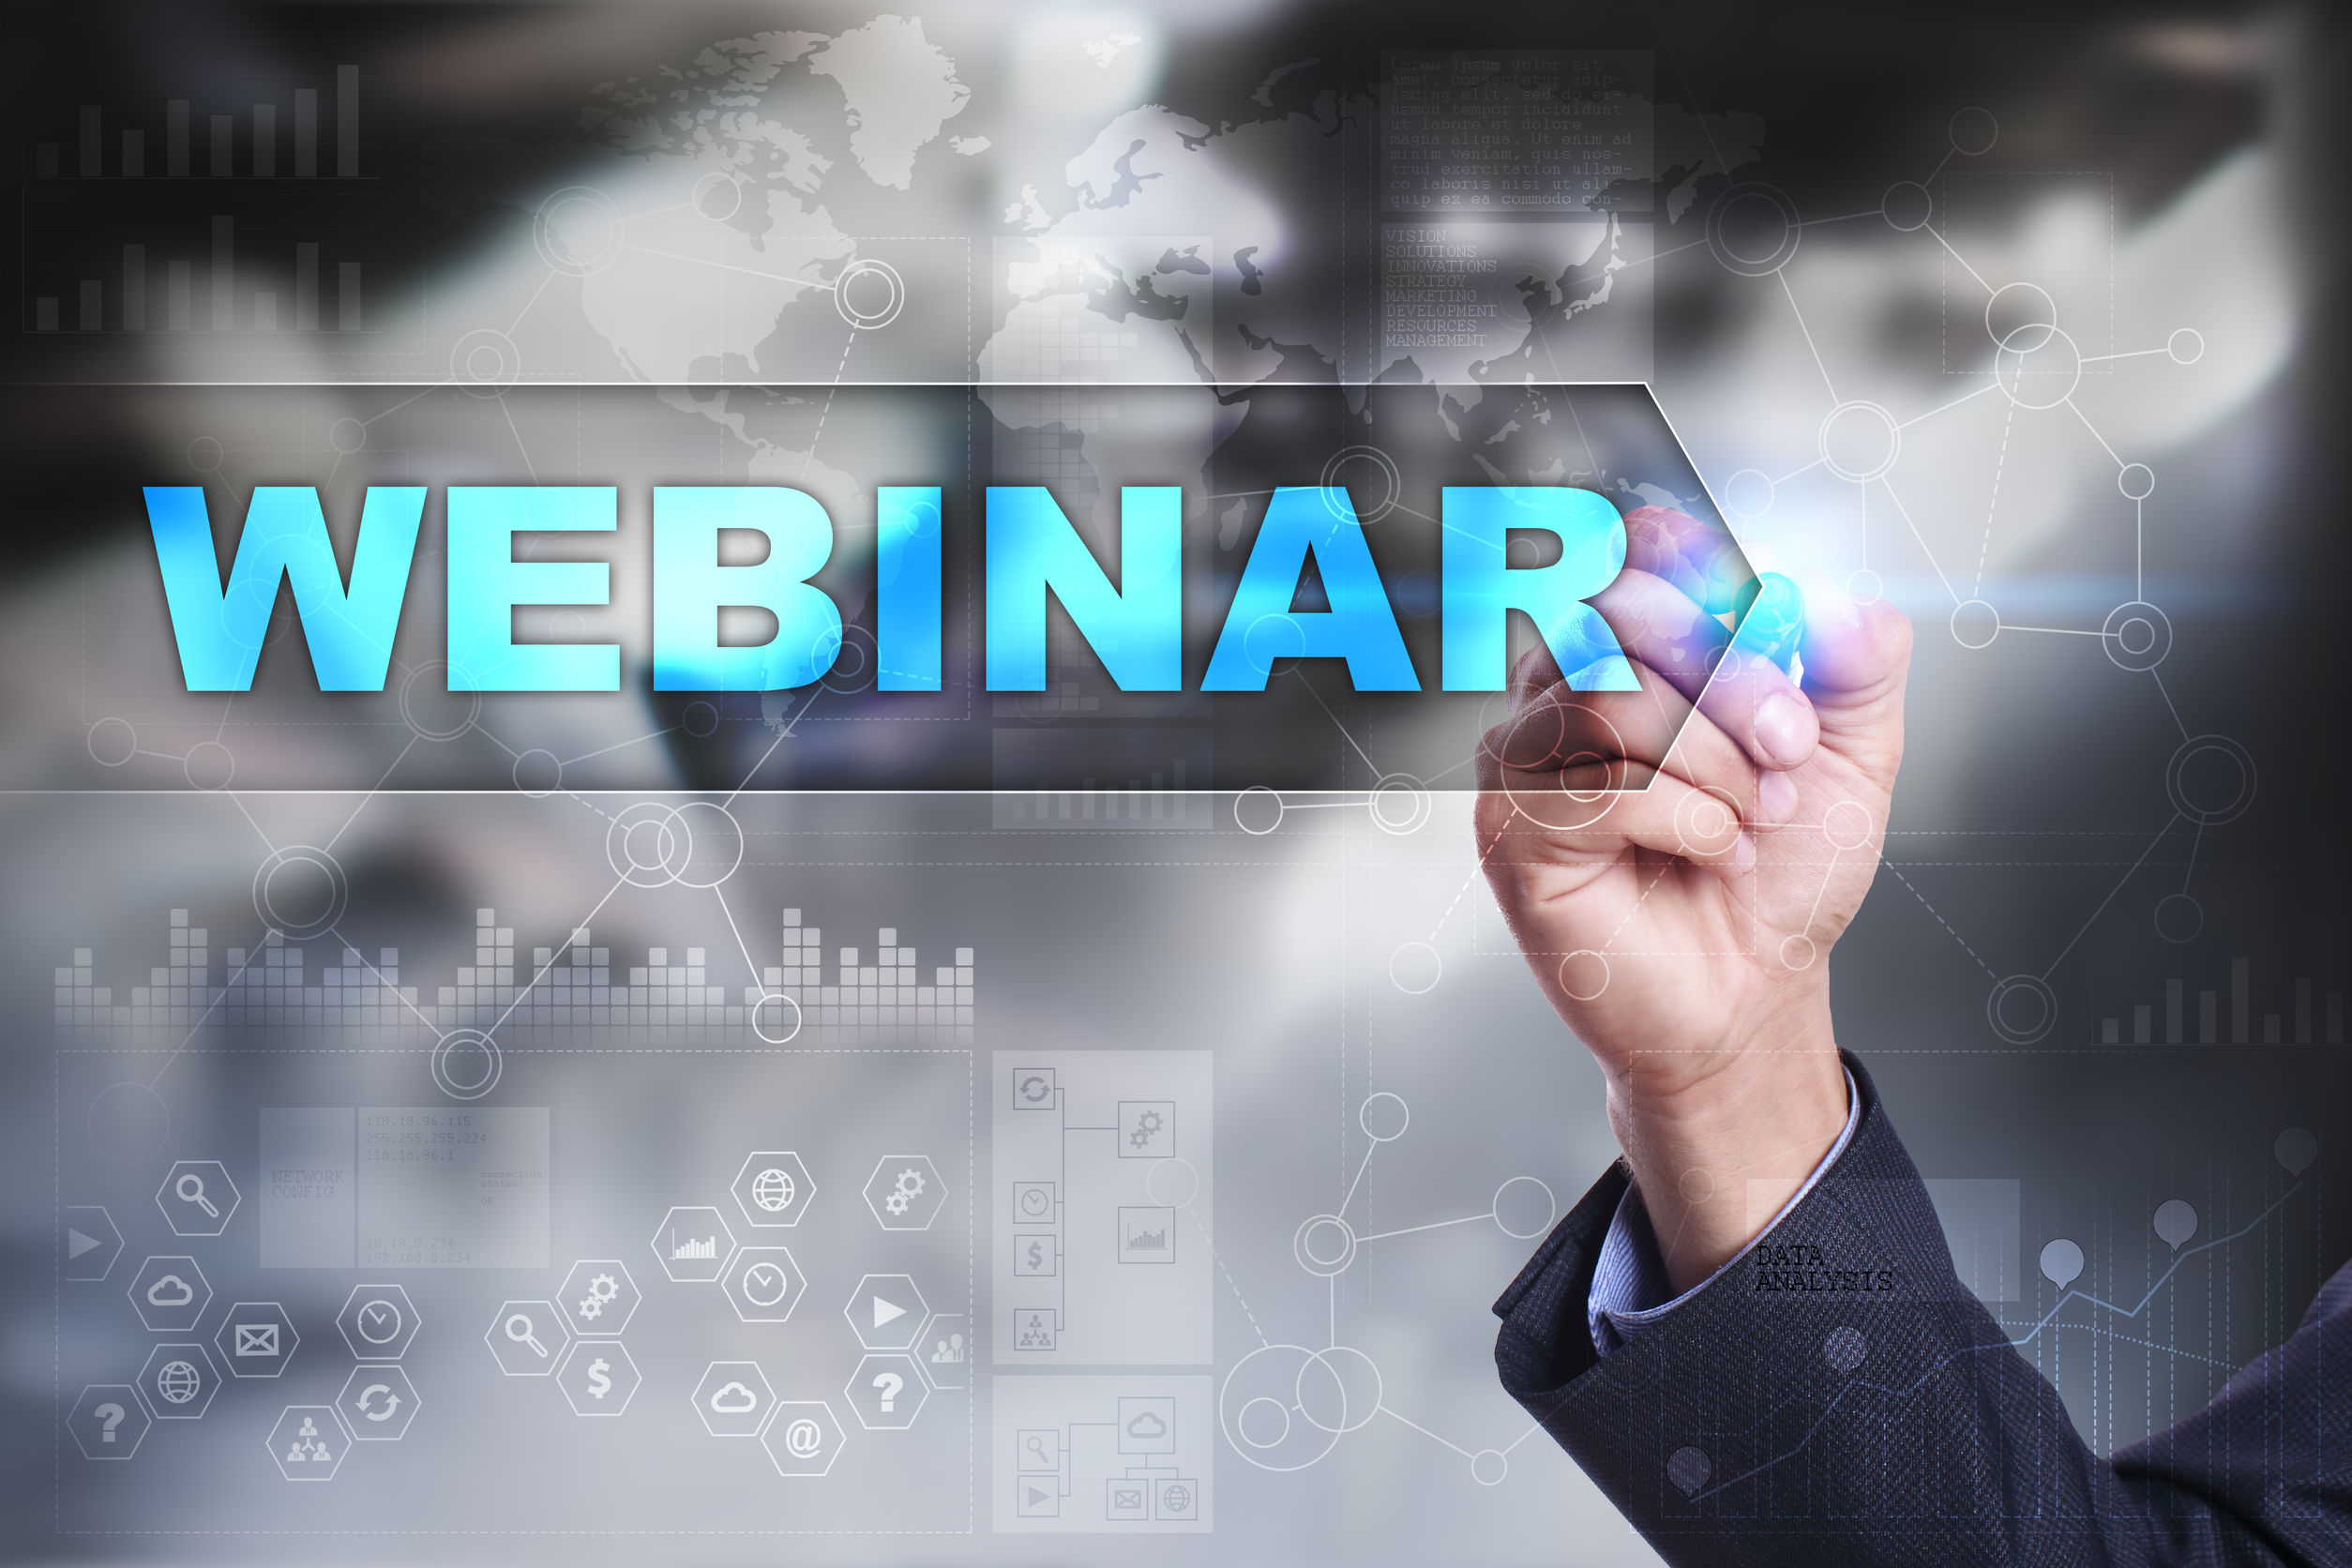 Help Your Business Spring Forward with Our April Webinars